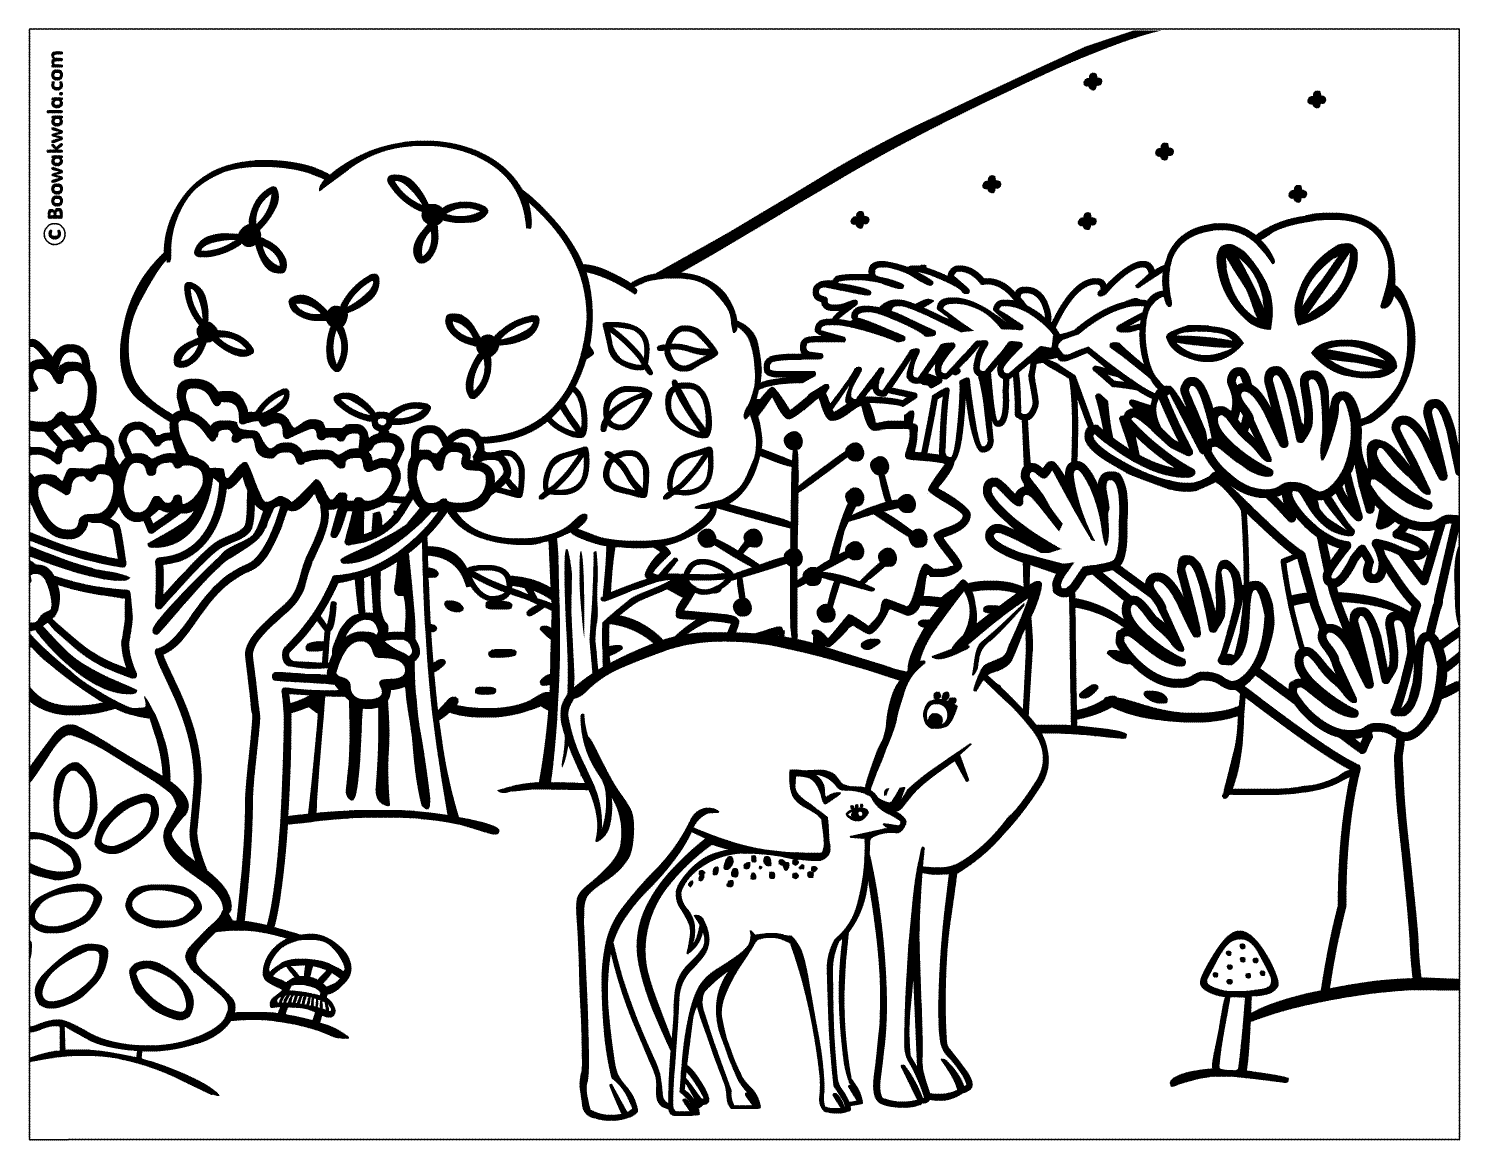 forest coloring sheets forest coloring page for children coloring home sheets forest coloring 1 1